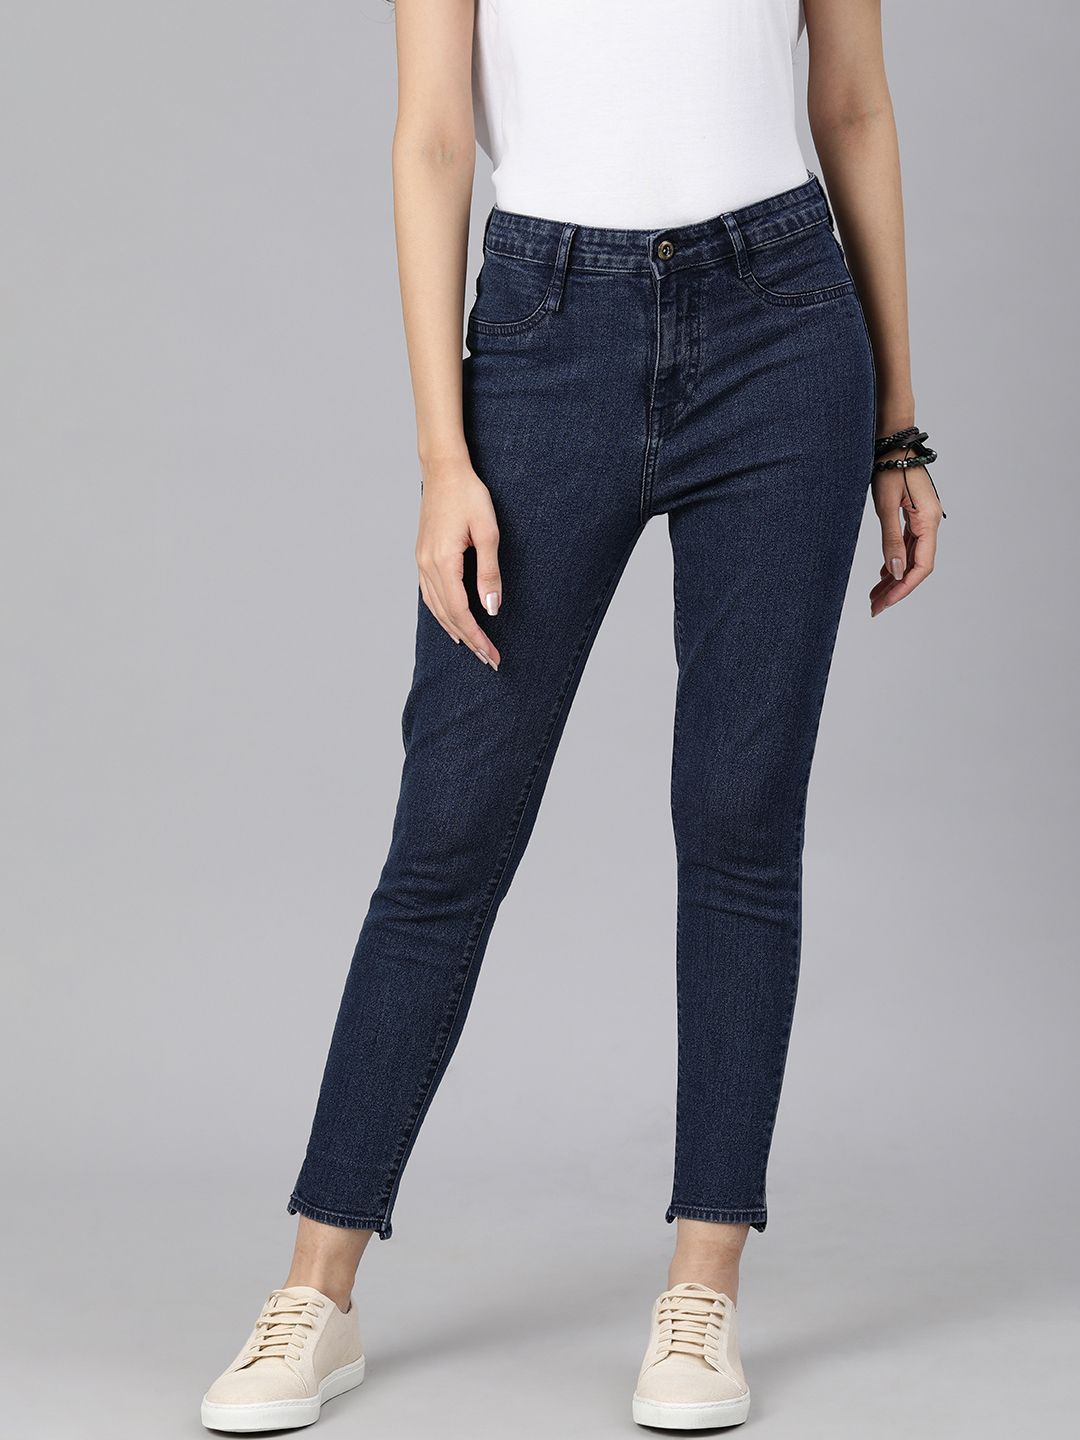 The Roadster Lifestyle Co Women Navy Blue Stretchable Jeans Price in India